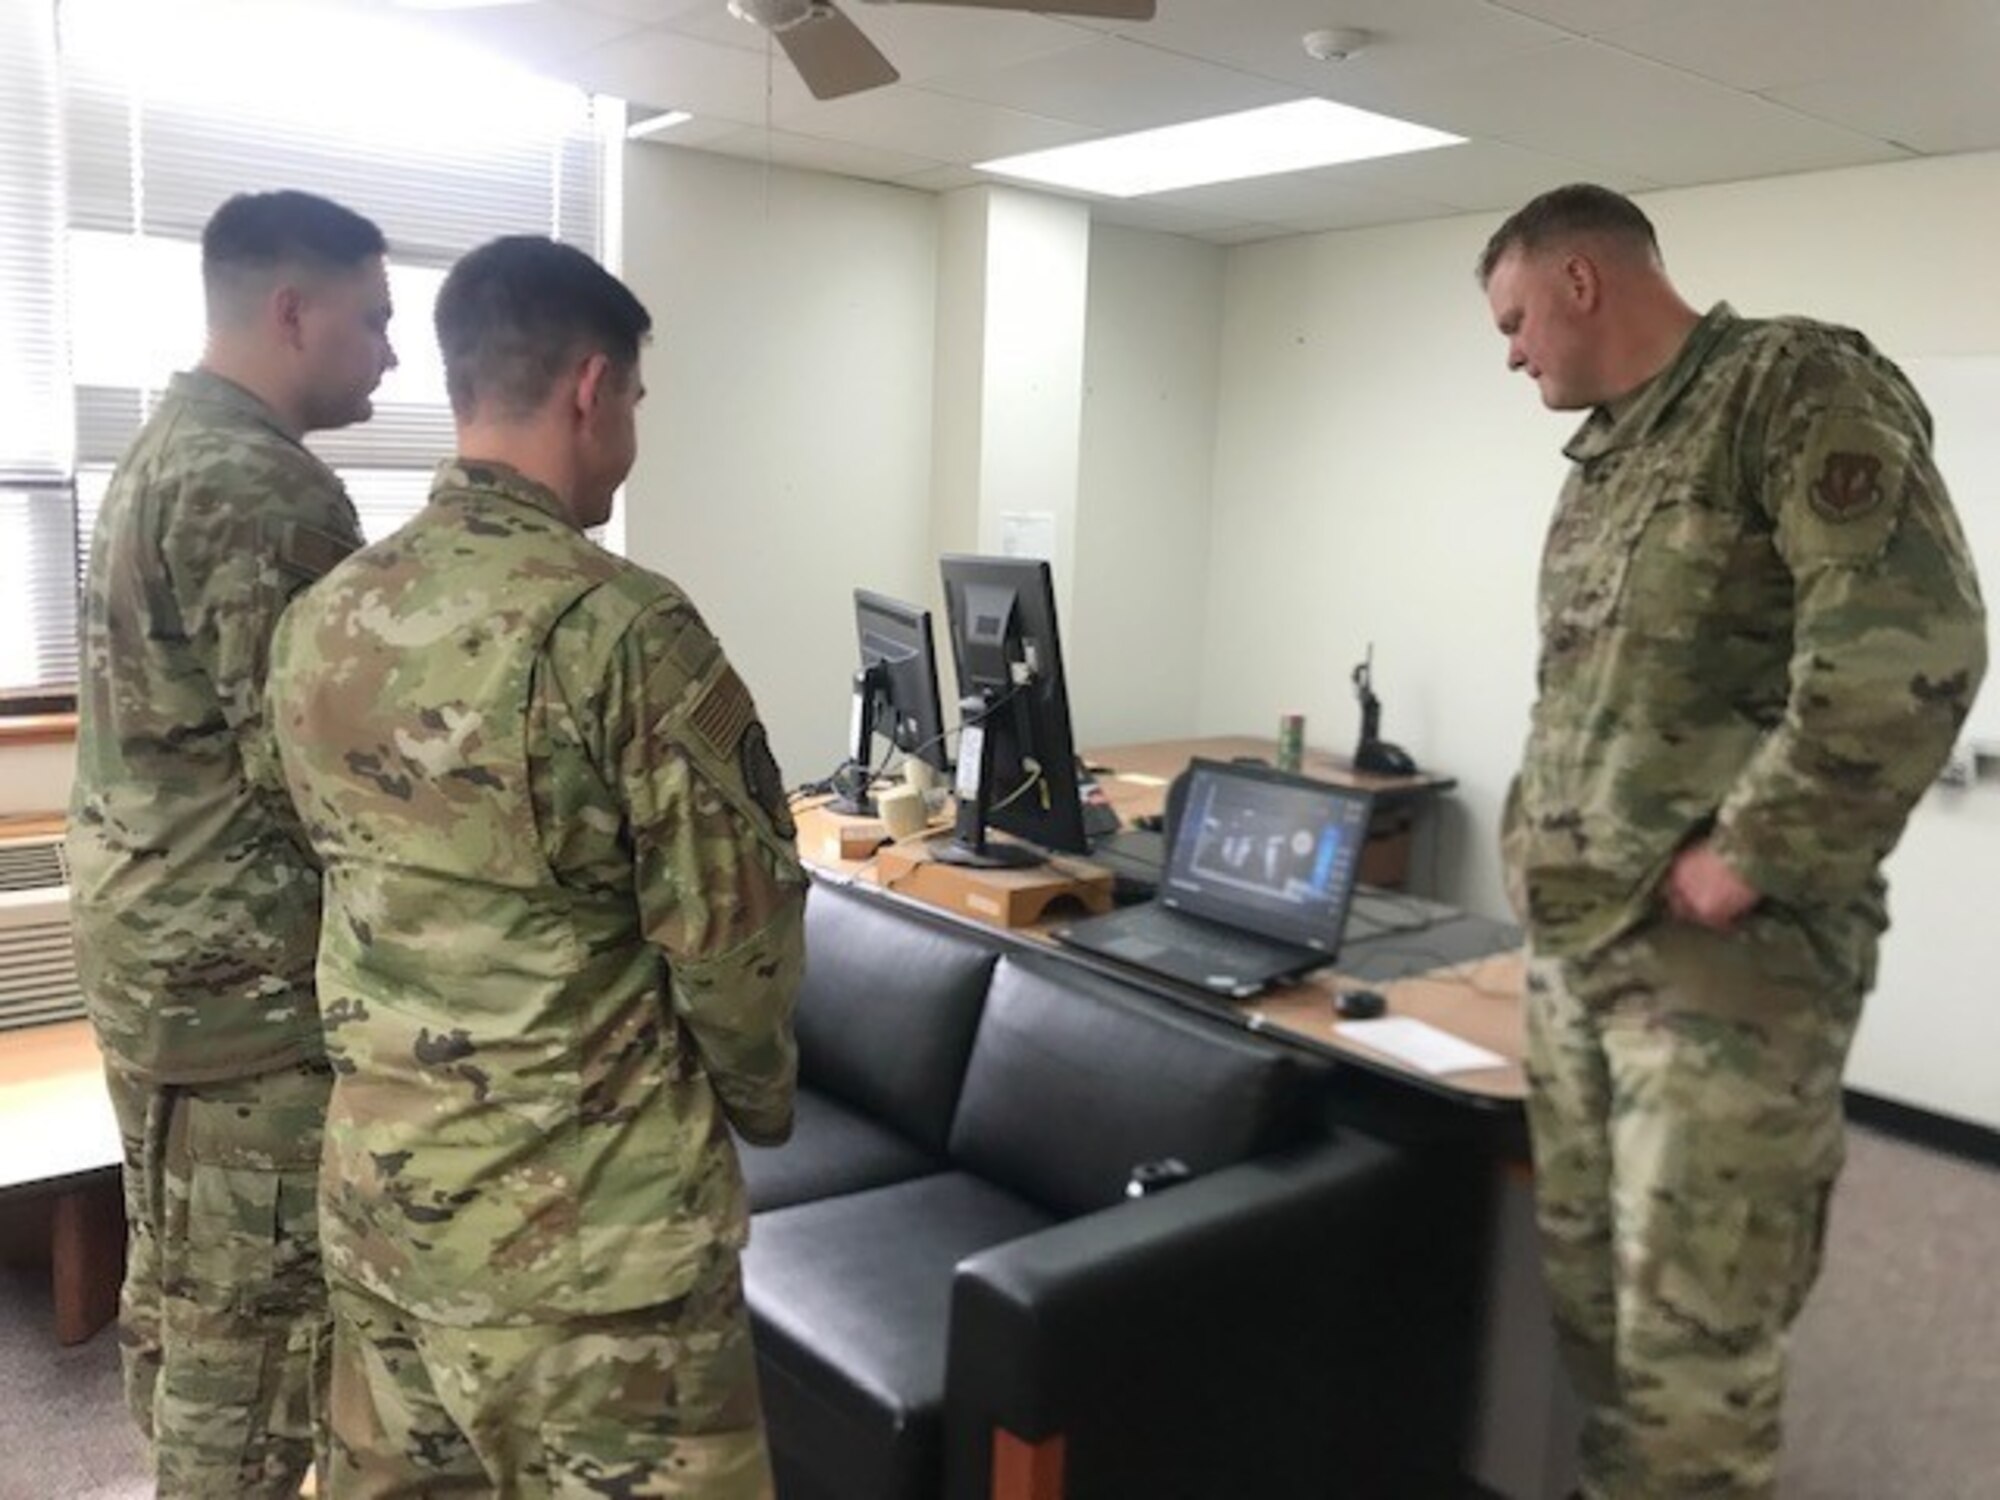 Three military members standing in an office.